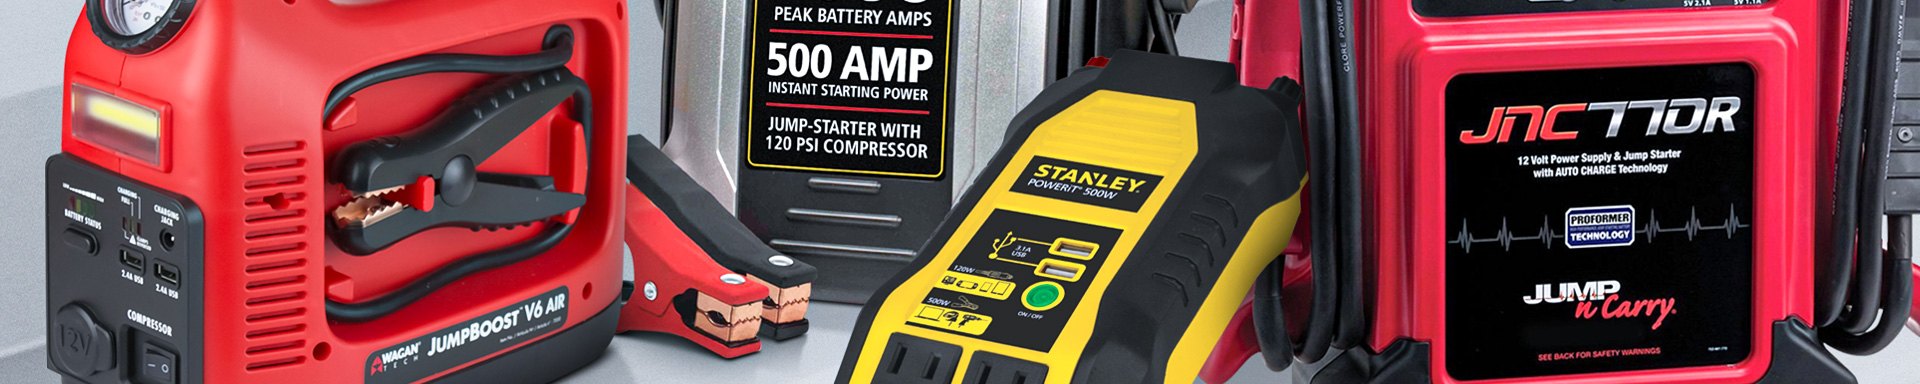 Wagan Battery Chargers & Jump Starters